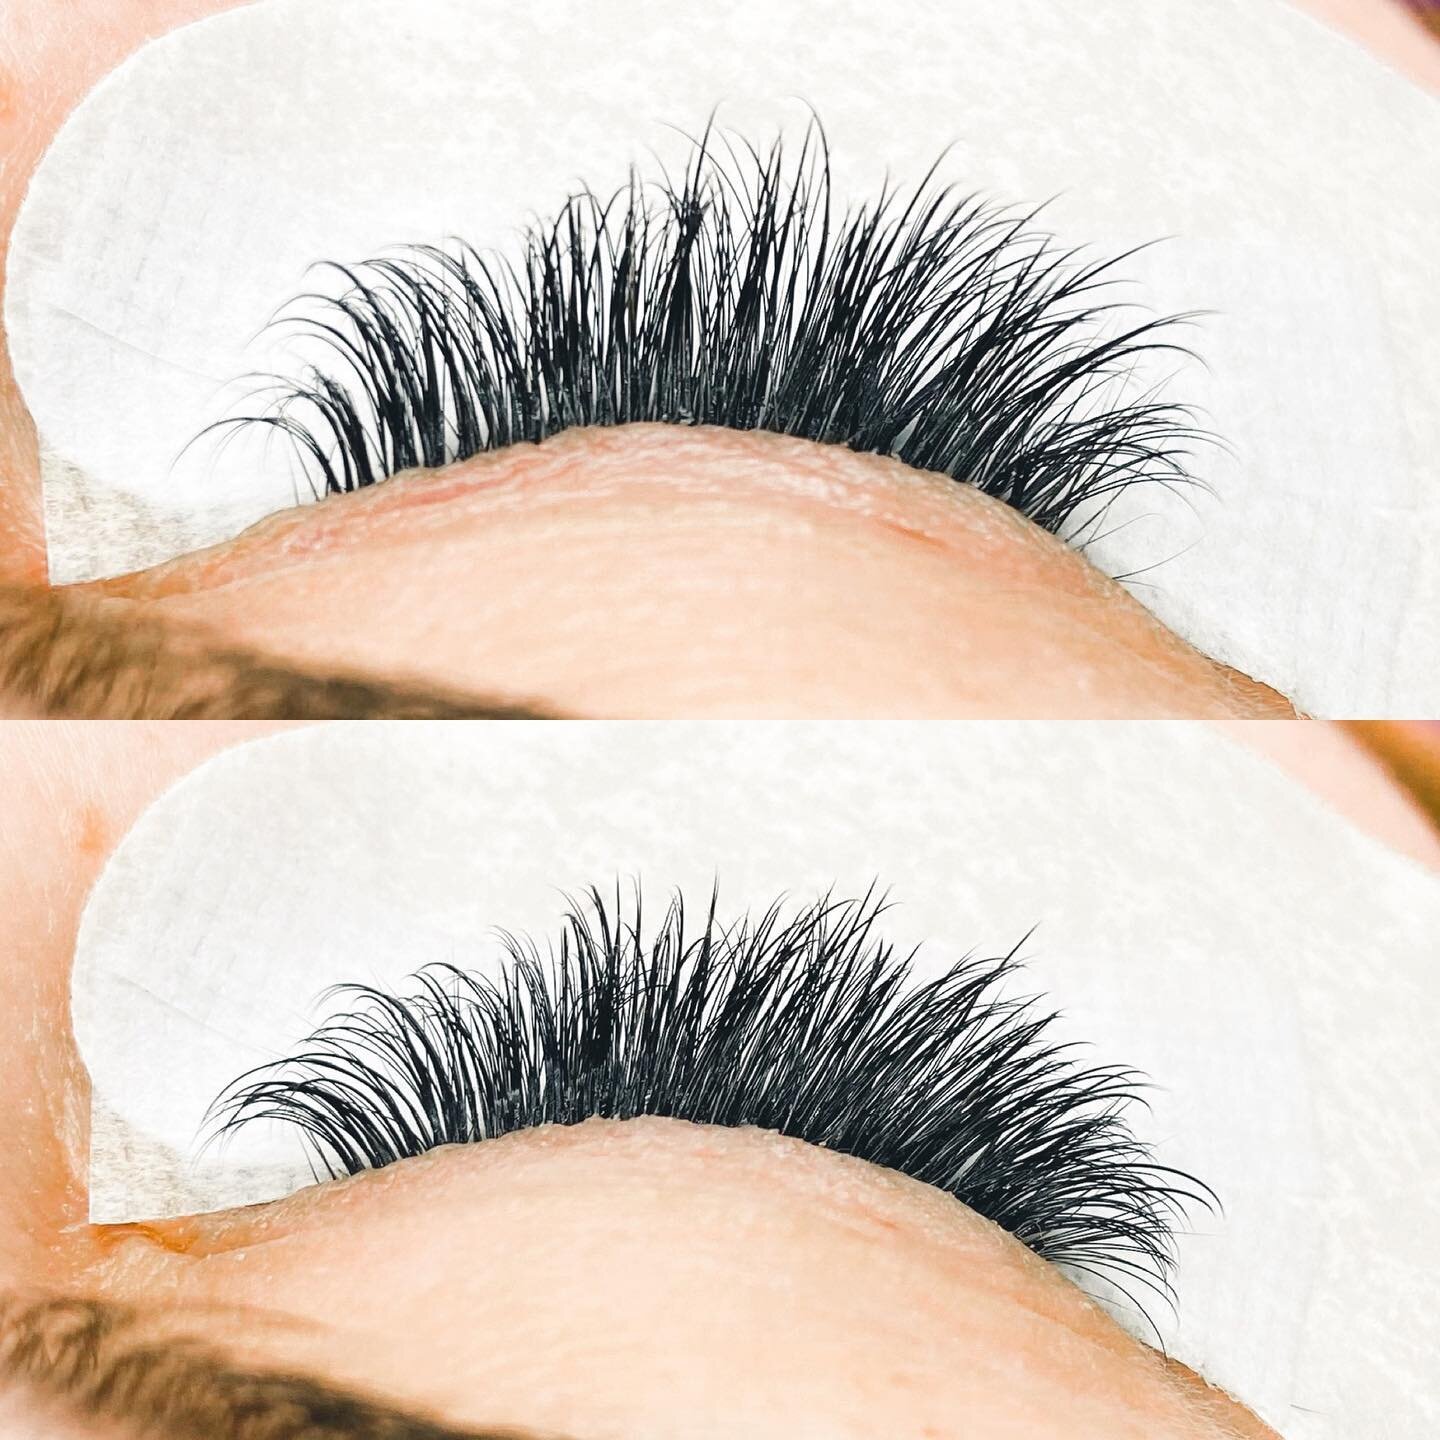 Top photo: BEFORE two week fill ✨
Bottom photo: AFTER ✨
⠀⠀⠀⠀⠀⠀⠀⠀⠀
I&rsquo;ve said it before and I&rsquo;ll say it again. The biggest factor in having great retention (besides having a great lash tech 🙋🏻&zwj;♀️) is keeping your lashes CLEAN. Washing